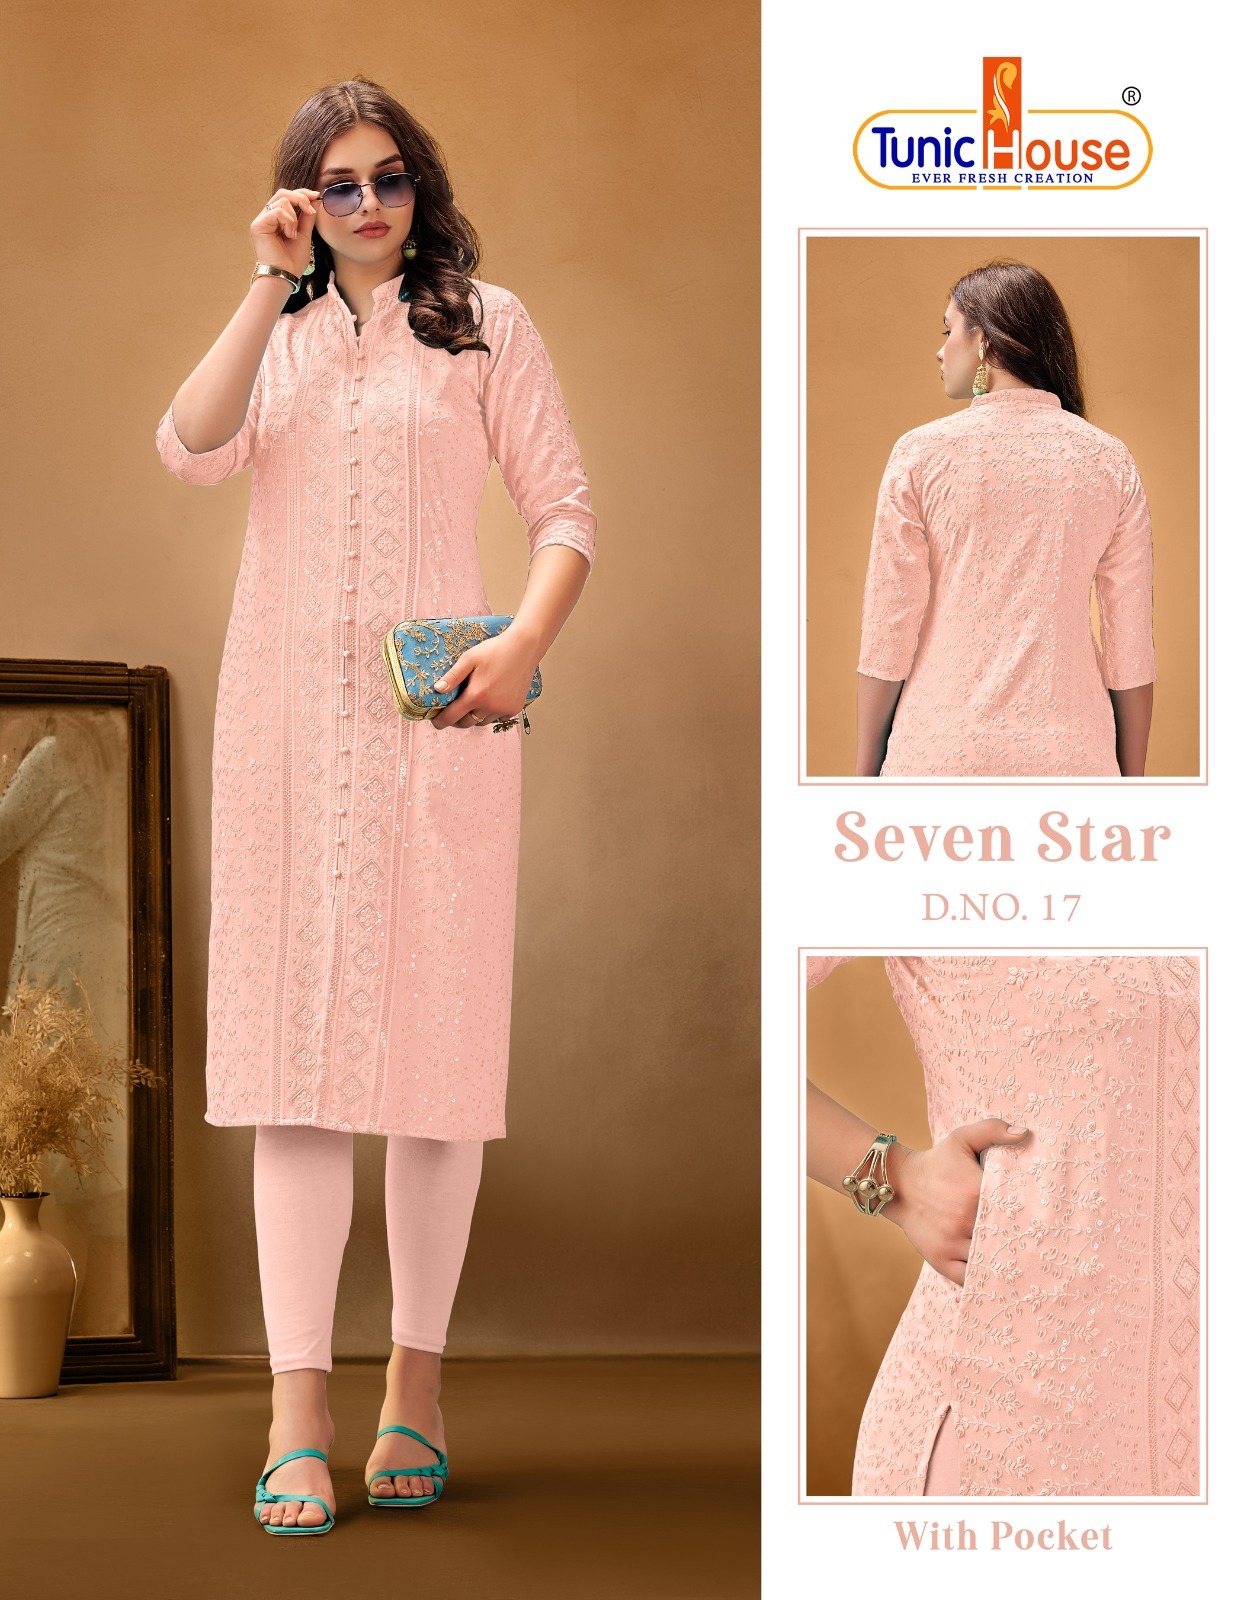 Tunic Houes 7 Star collection 8